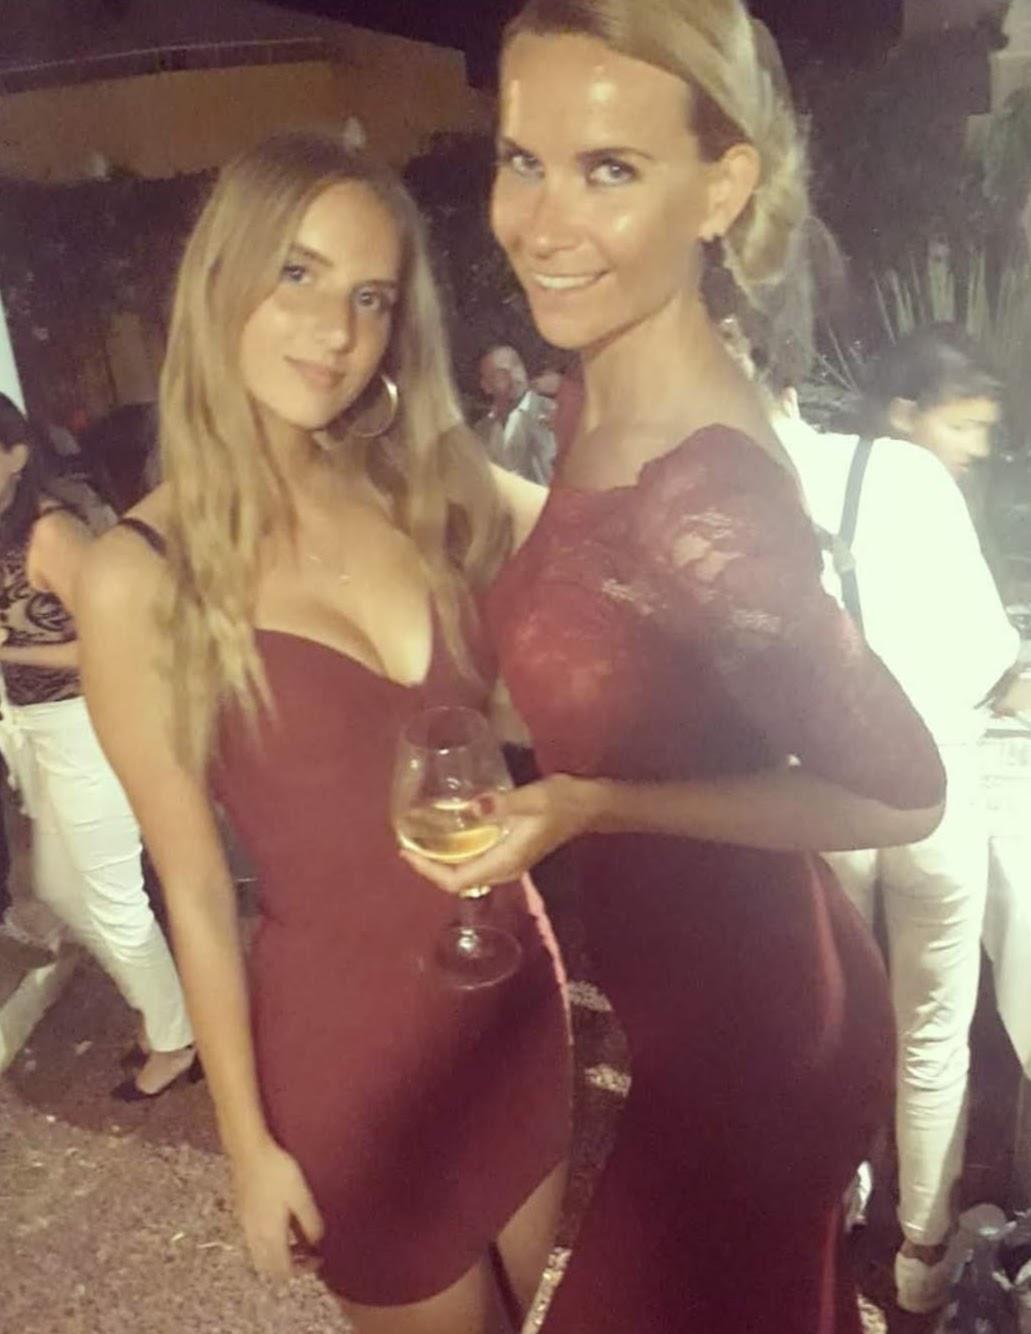 Wearing tight dresses to a party